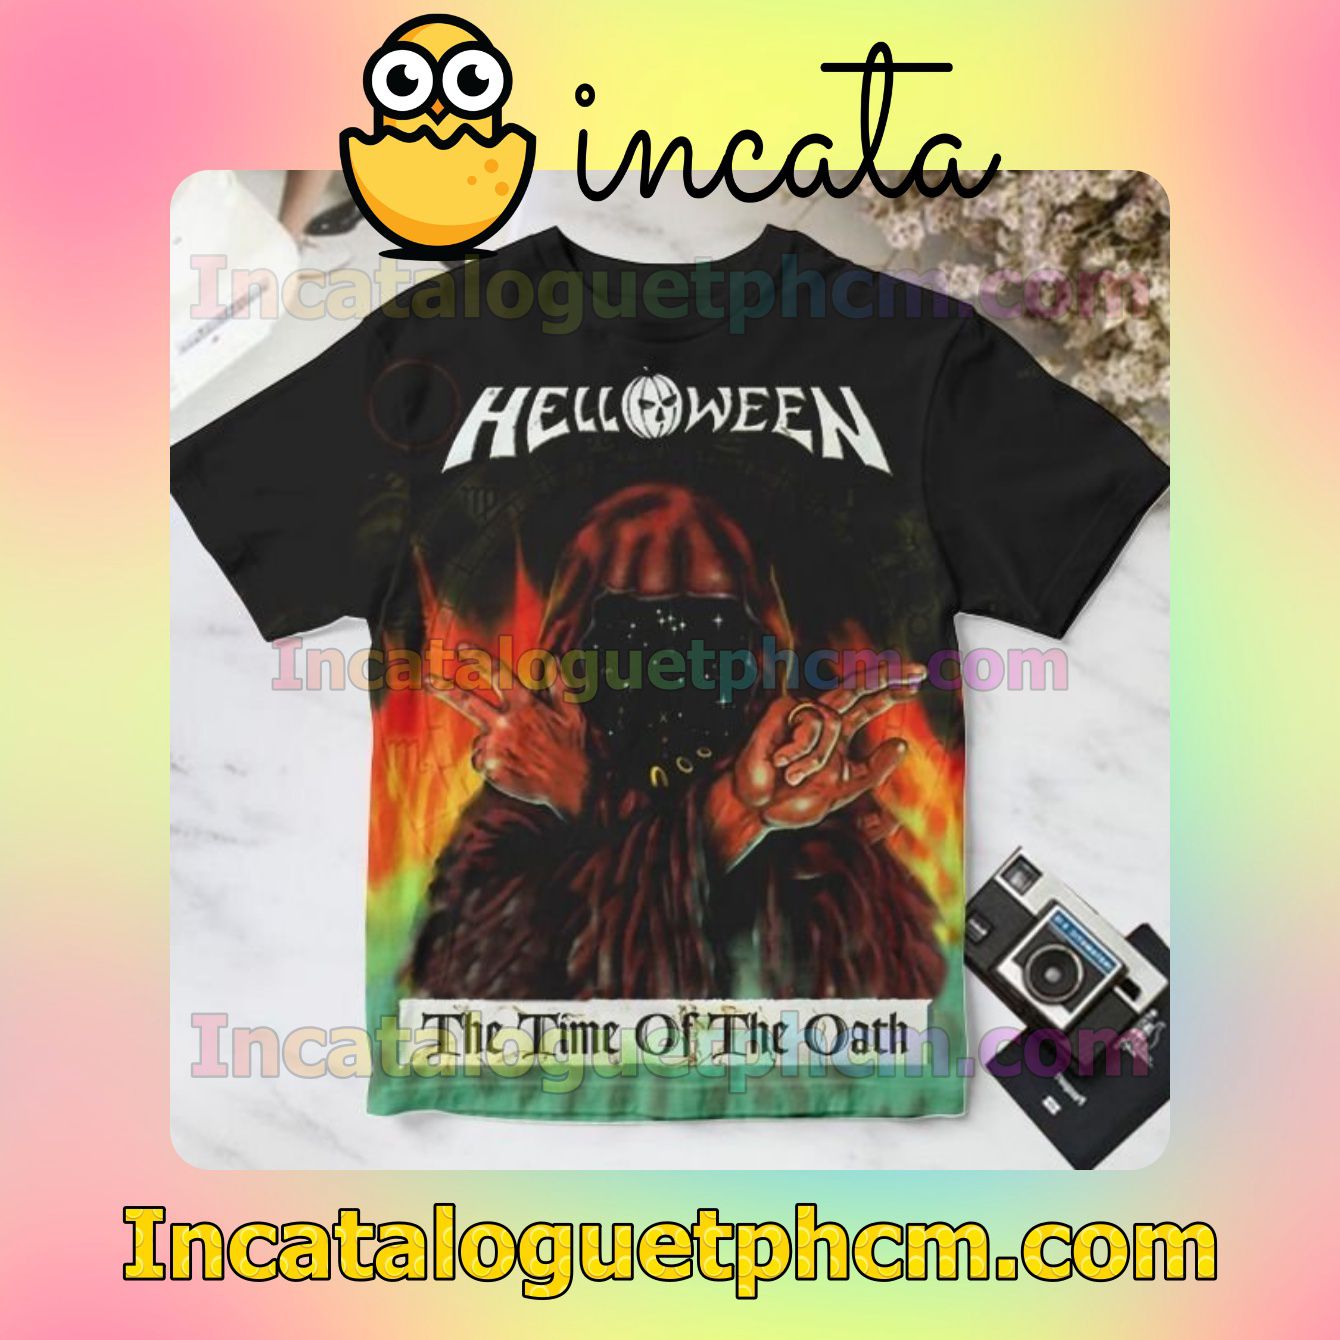 Helloween The Time Of The Oath Album Cover Personalized Shirt